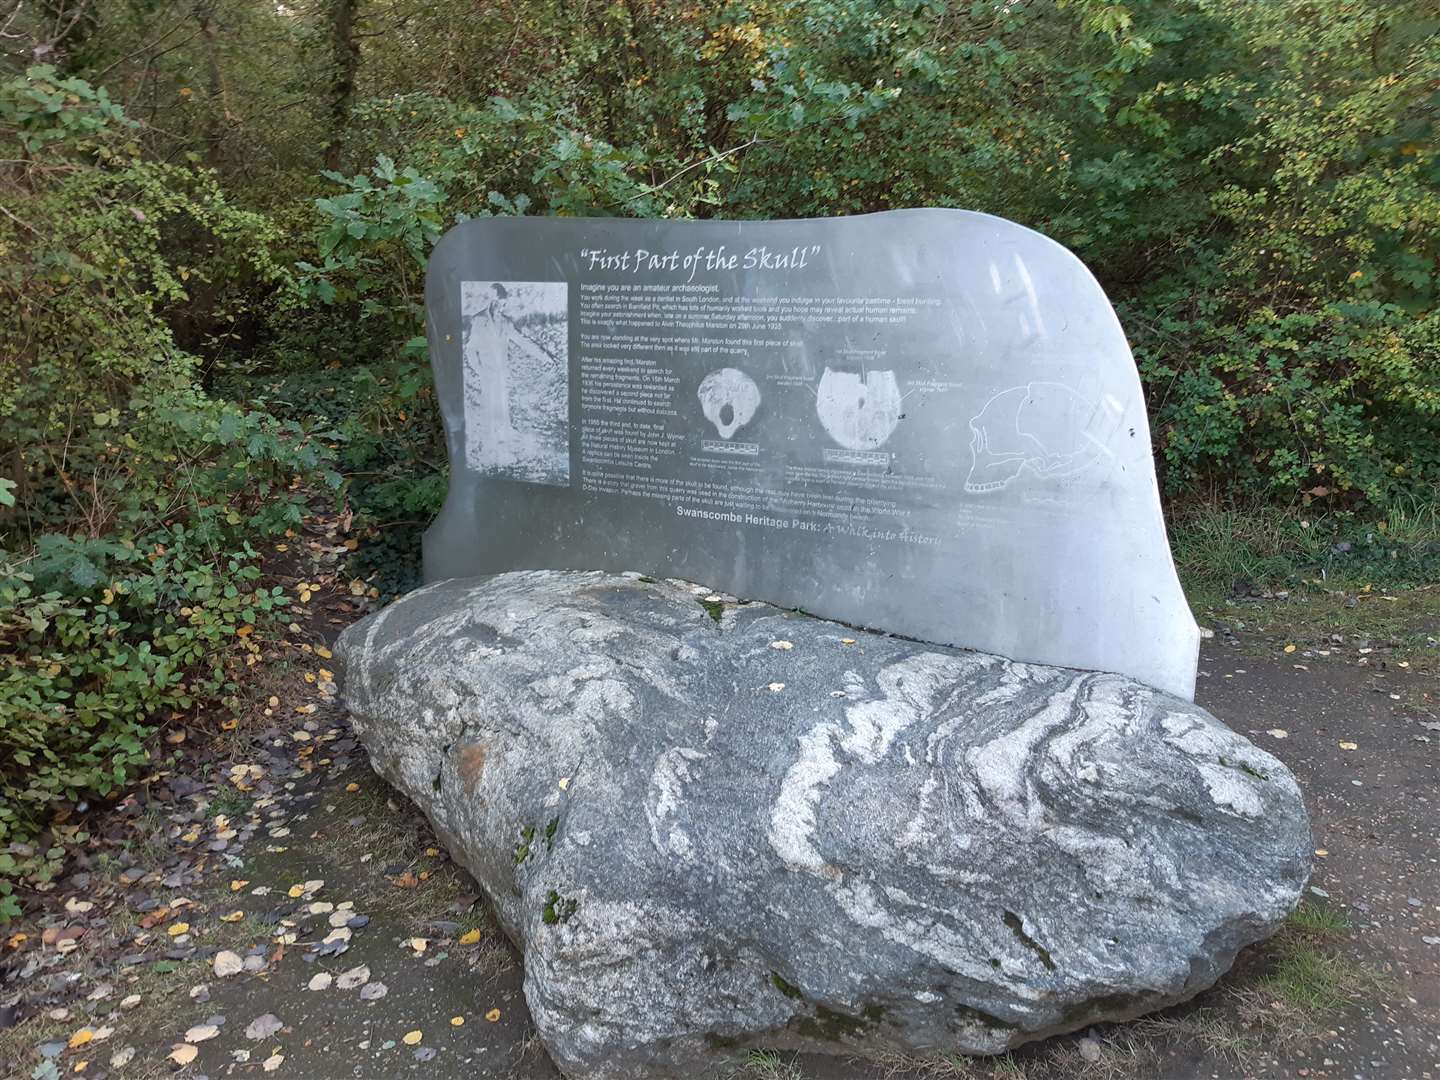 A granite stone marks the spot of Alvan Marston's remarkable first discovery in 1935